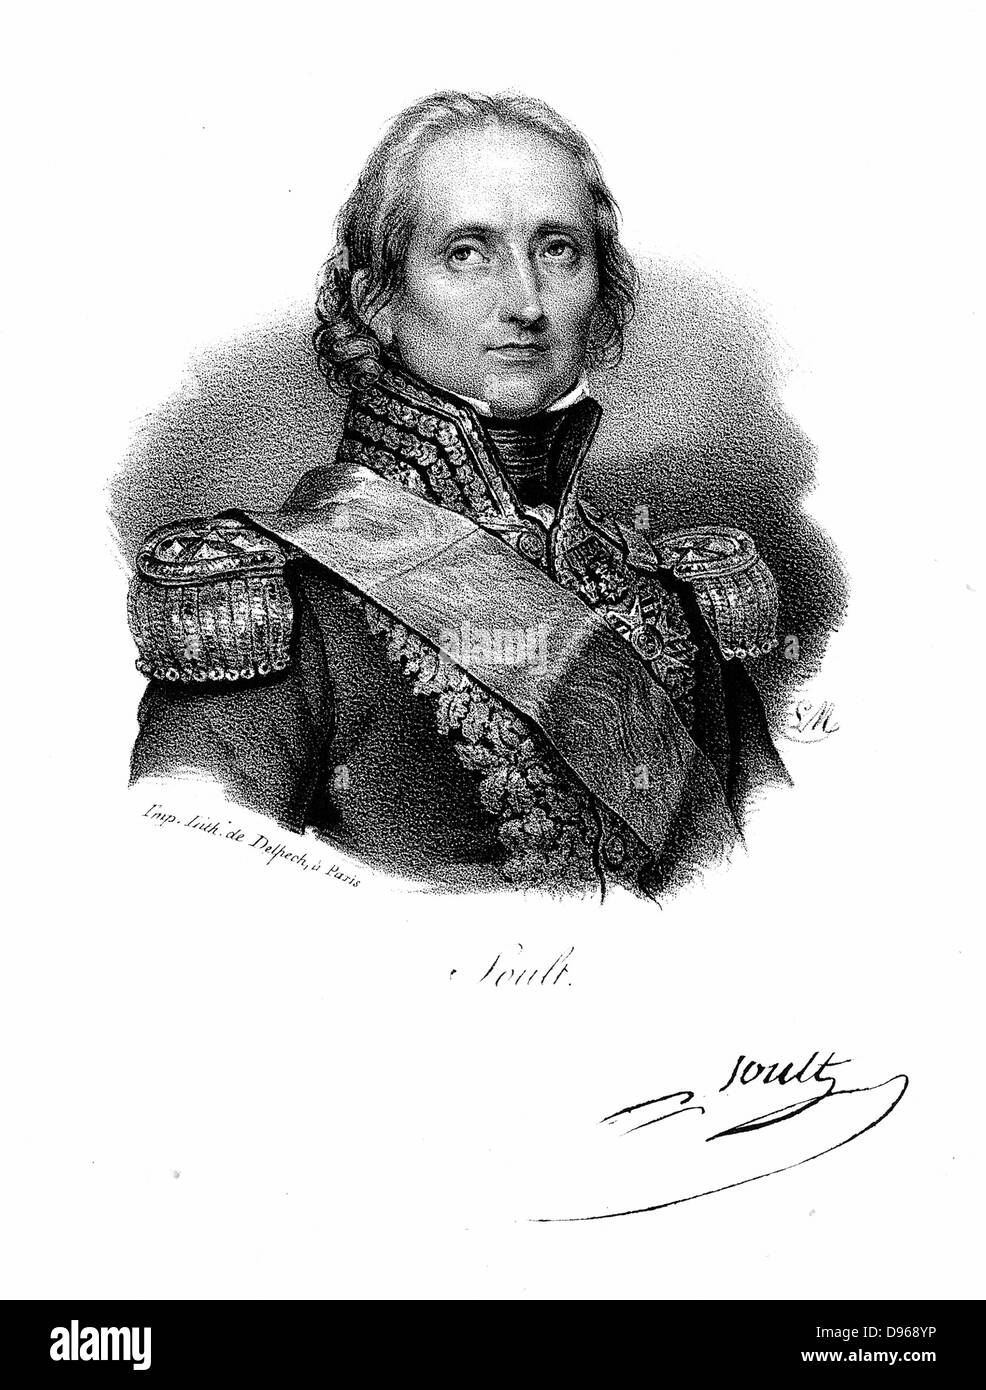 Nicolas Jean de Dieu Soult (1769-1851) French soldier; created Marshal of France by Napoleon 1804; French commander in Spain and Portugal. Lithograph c1830. Stock Photo